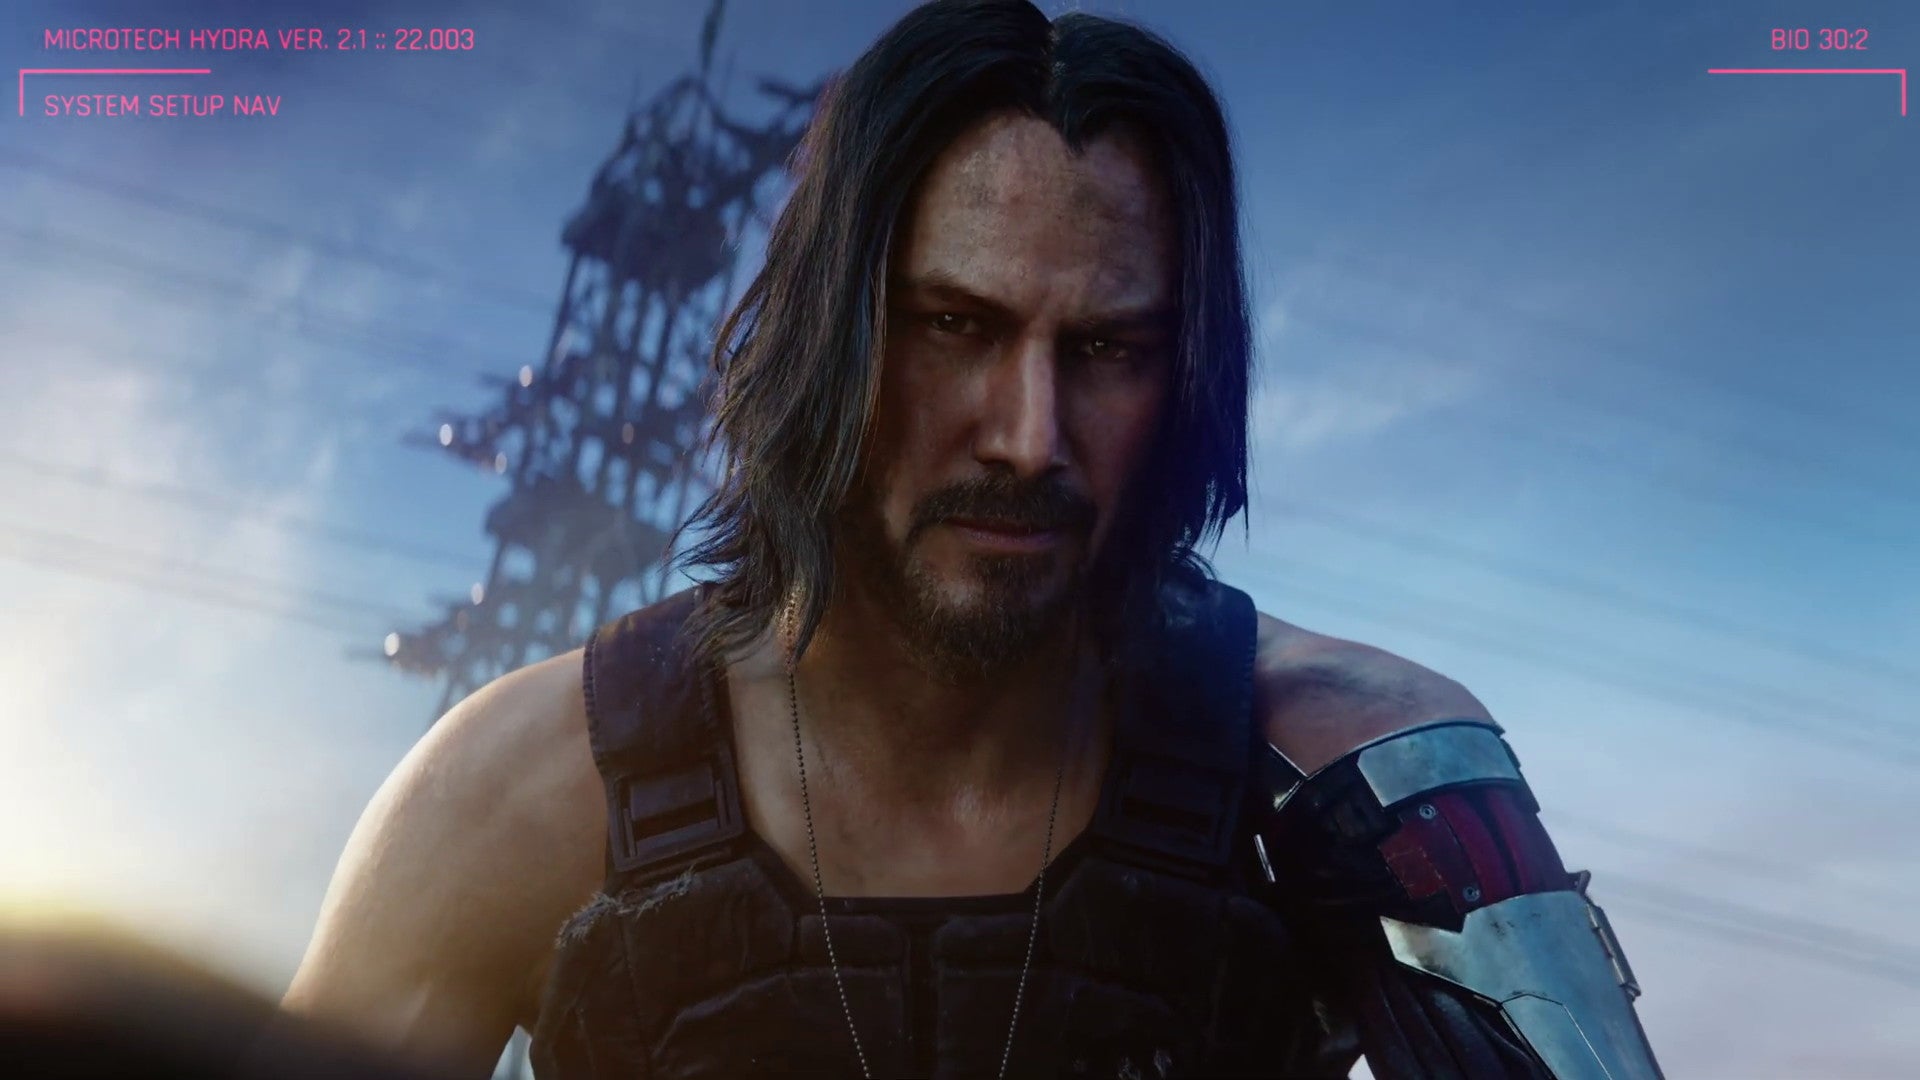 Image for No, Keanu Reeves is not a romance option in Cyberpunk 2077